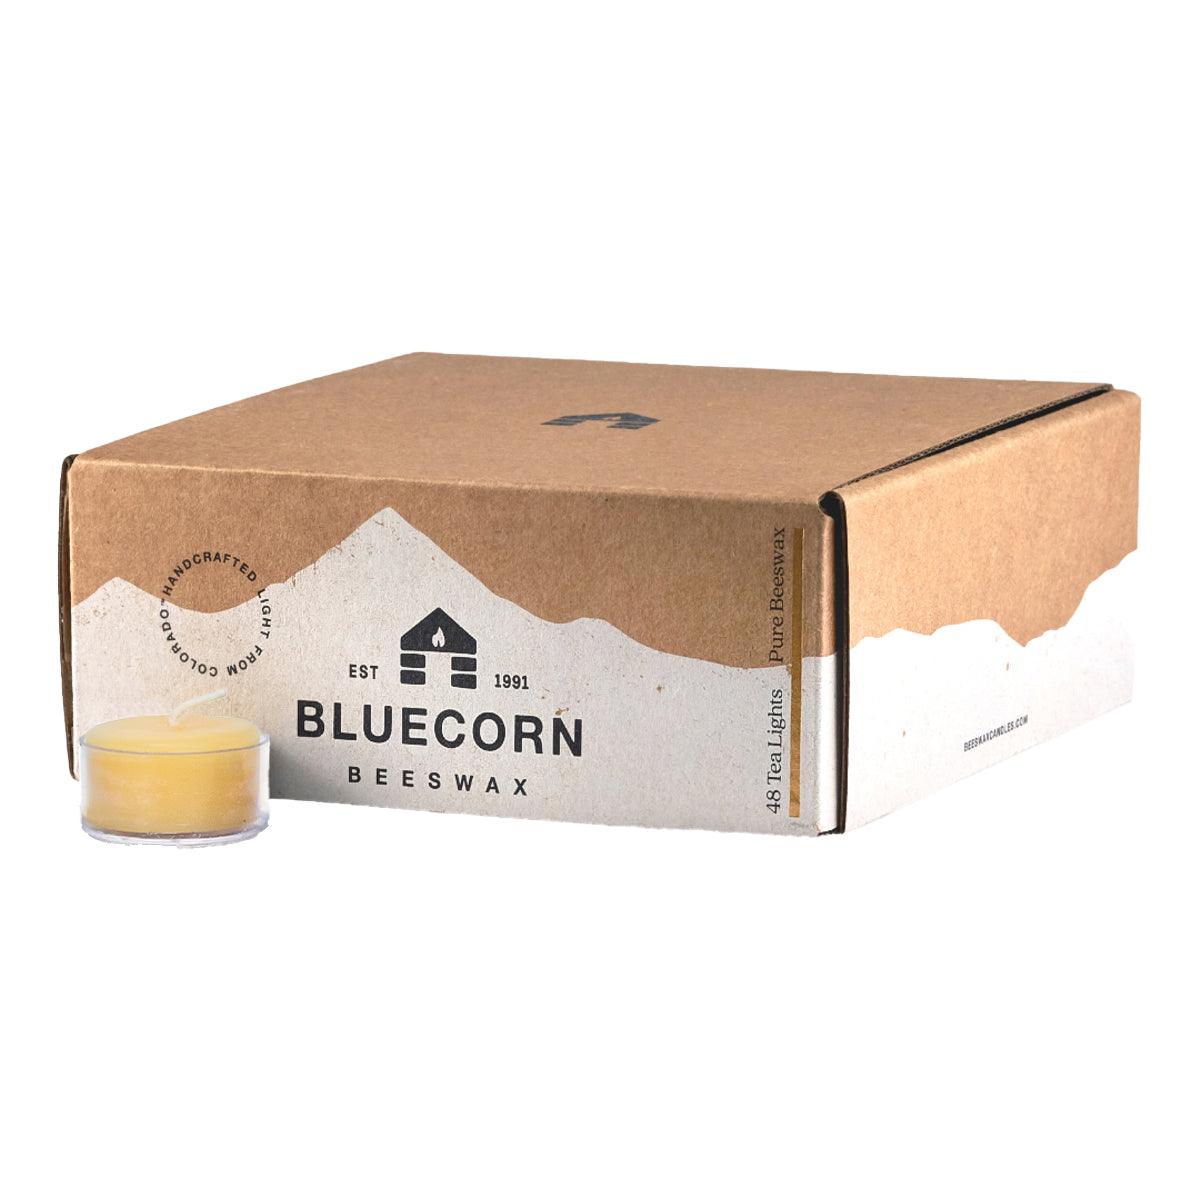 Bluecorn Beeswax 100% Pure Beeswax 48 Pack Raw Tea Light in Clear Cups. Picture features one Tea Light outside of Bluecorn branded Tea Light Box with a white background. Box features Bluecorn Beeswax name and logo, with an outline of Mt. Wilson in white printed on a 100% recycled kraft paper box. Tea lights will burn for about 5 hours each.